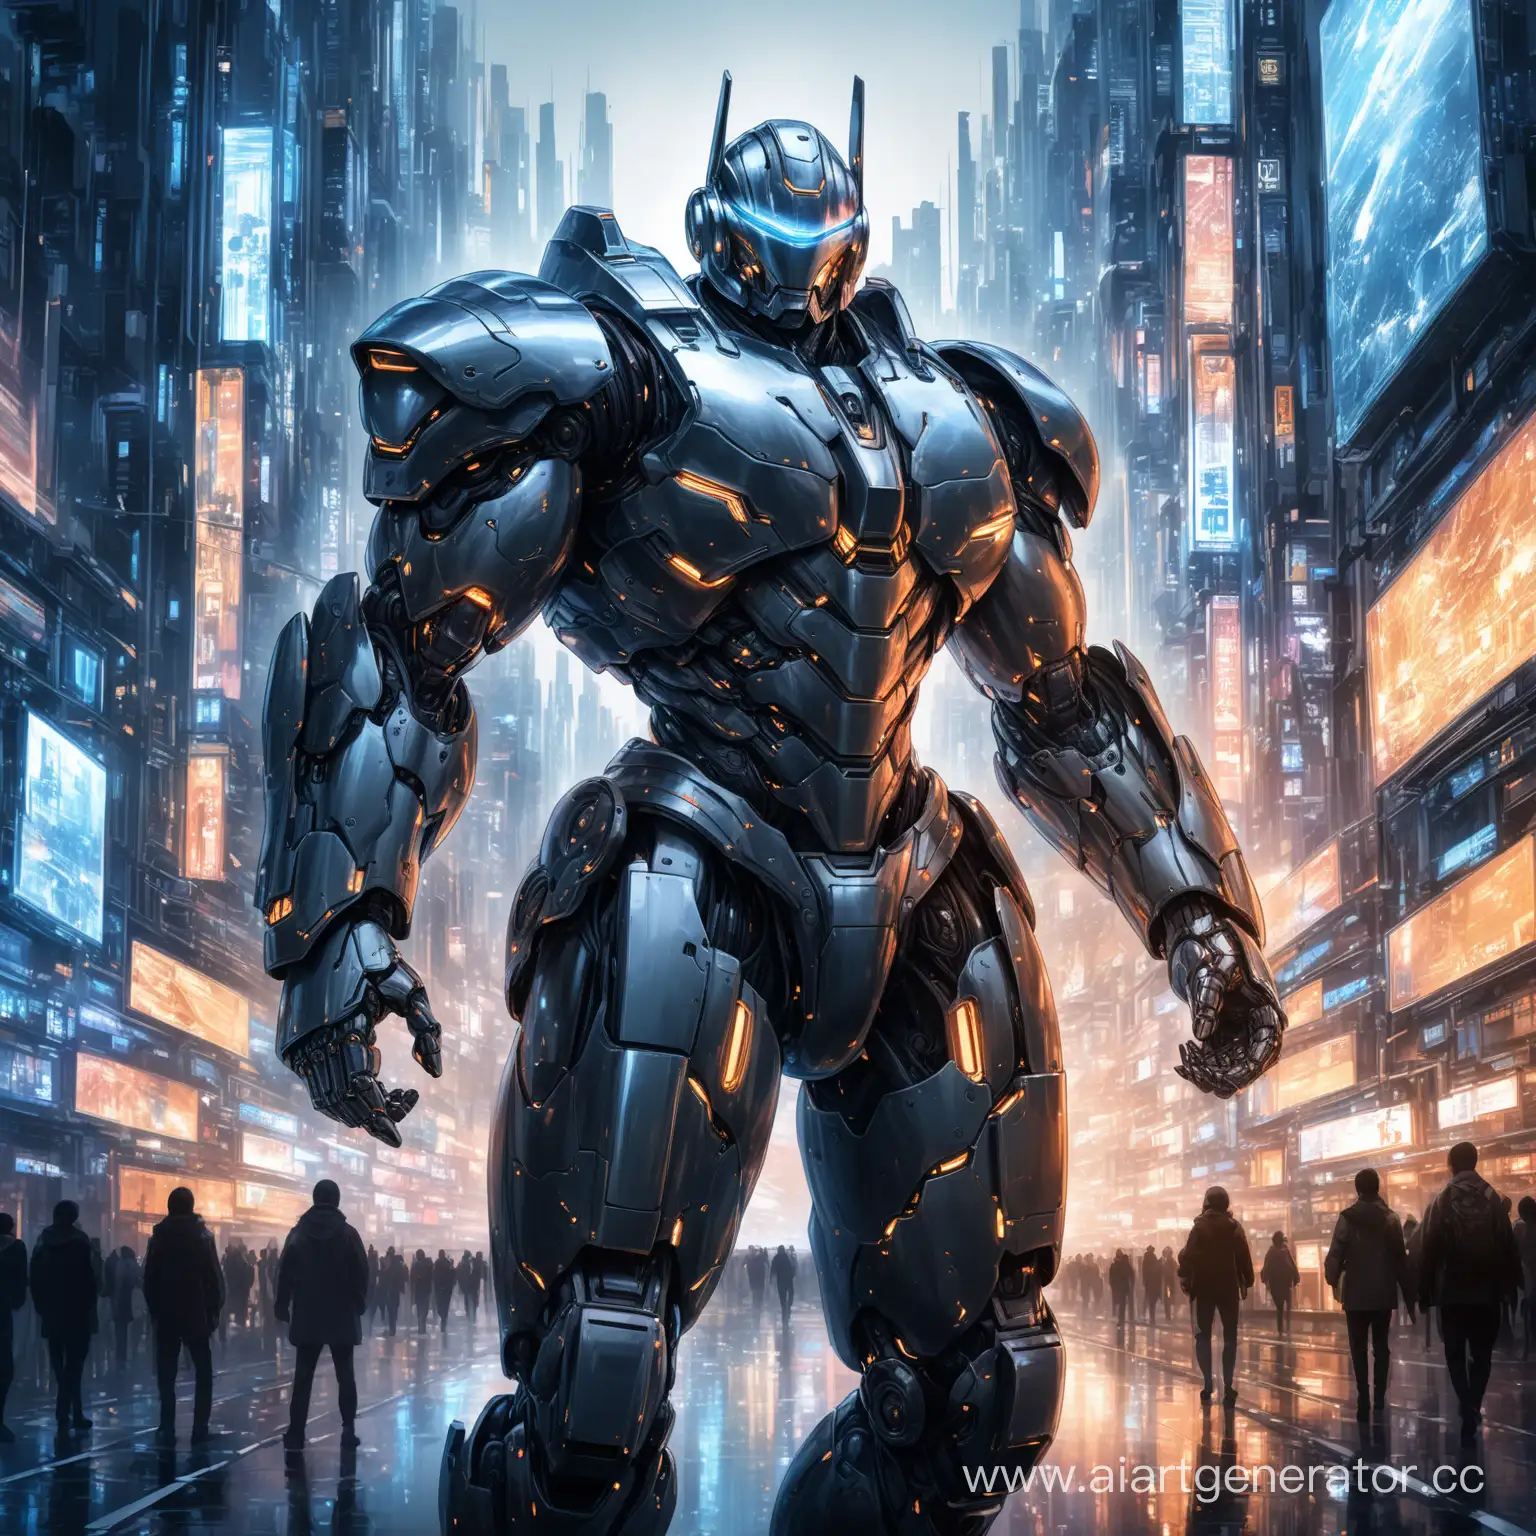 Futuristic-Robocop-3001-in-Black-FHATCAL-Warriors-Style